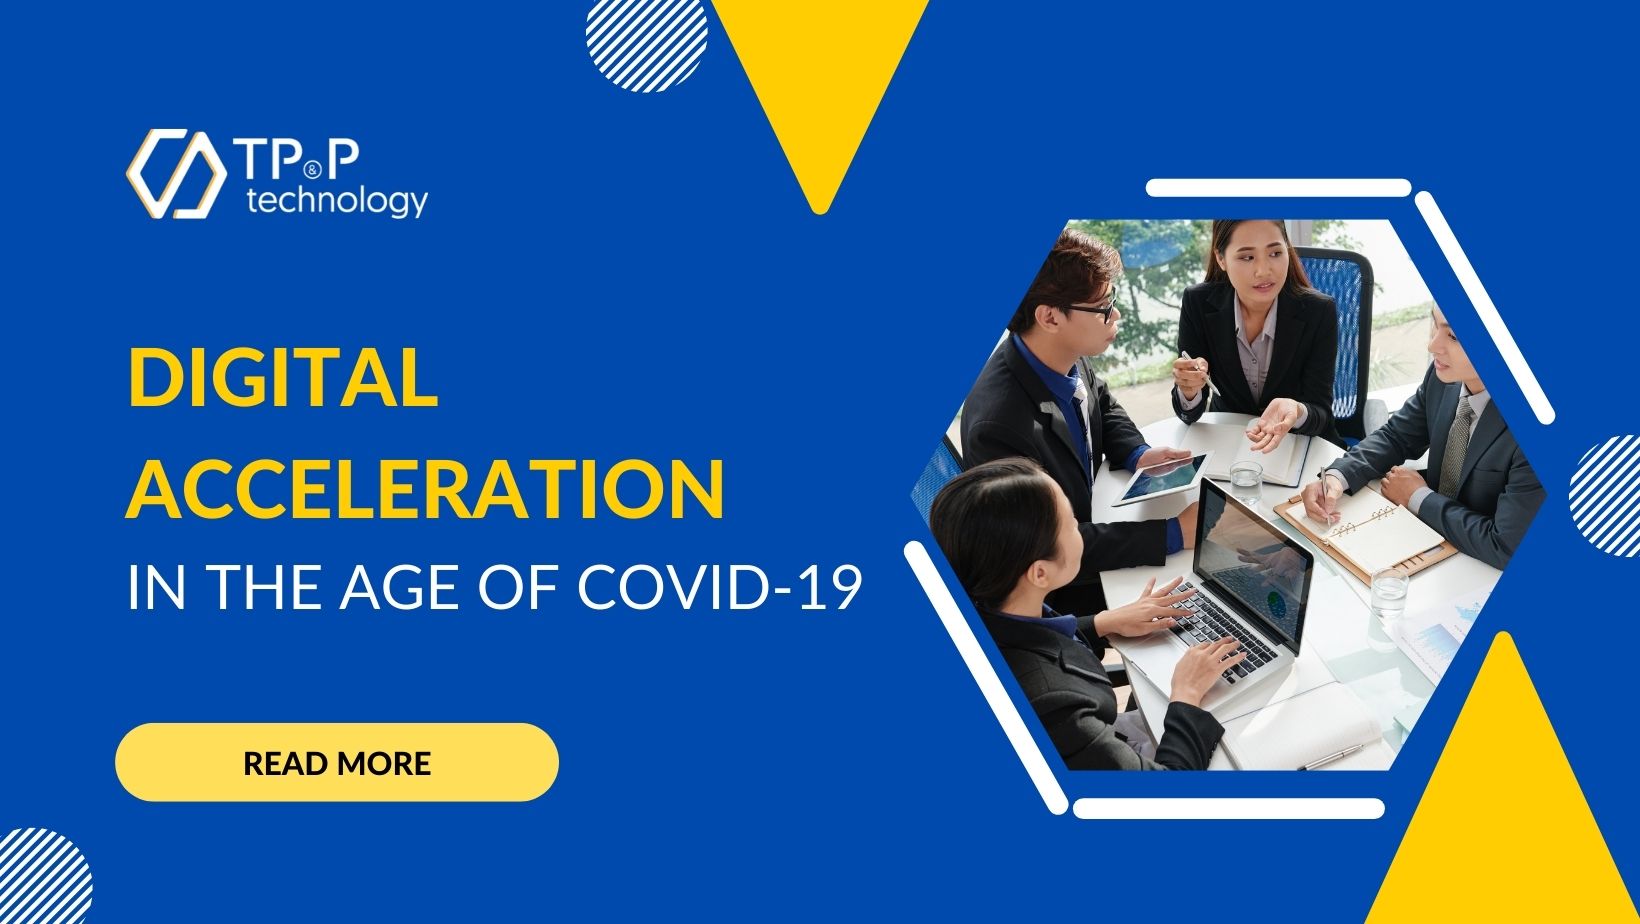 Digital Acceleration In The Age Of Covid-19